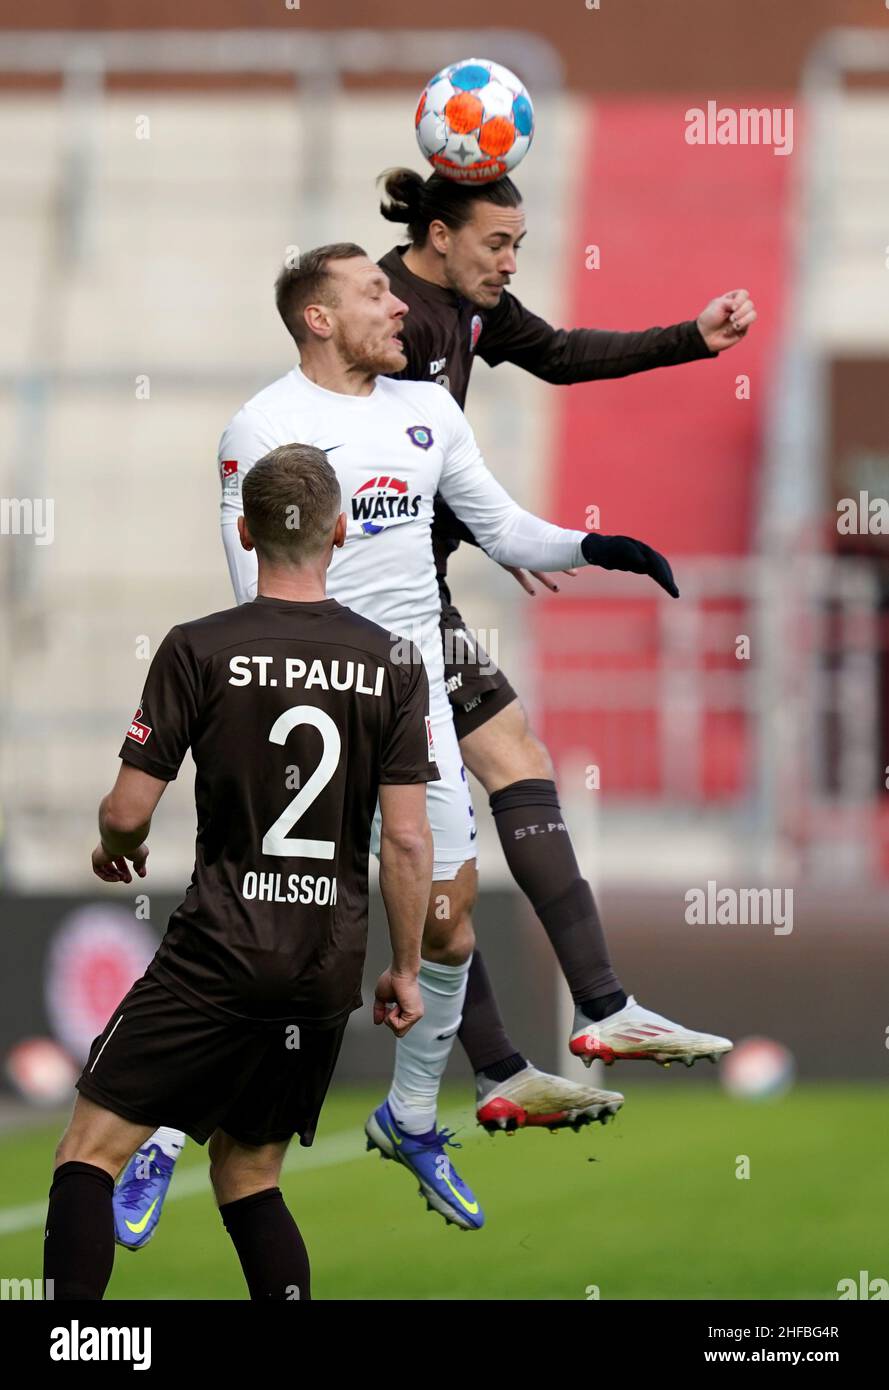 Hamburg, Germany. 15th Jan, 2022. Soccer: 2. Bundesliga, 19th matchday, FC St. Pauli - Erzgebirge Aue, at Millerntor Stadium. St. Pauli's Jackson Irvine (r-l), Aue's Ben Zolinski and St. Pauli's Sebastian Ohlsson. Credit: Marcus Brandt/dpa - IMPORTANT NOTE: In accordance with the requirements of the DFL Deutsche Fußball Liga and the DFB Deutscher Fußball-Bund, it is prohibited to use or have used photographs taken in the stadium and/or of the match in the form of sequence pictures and/or video-like photo series./dpa/Alamy Live News Stock Photo